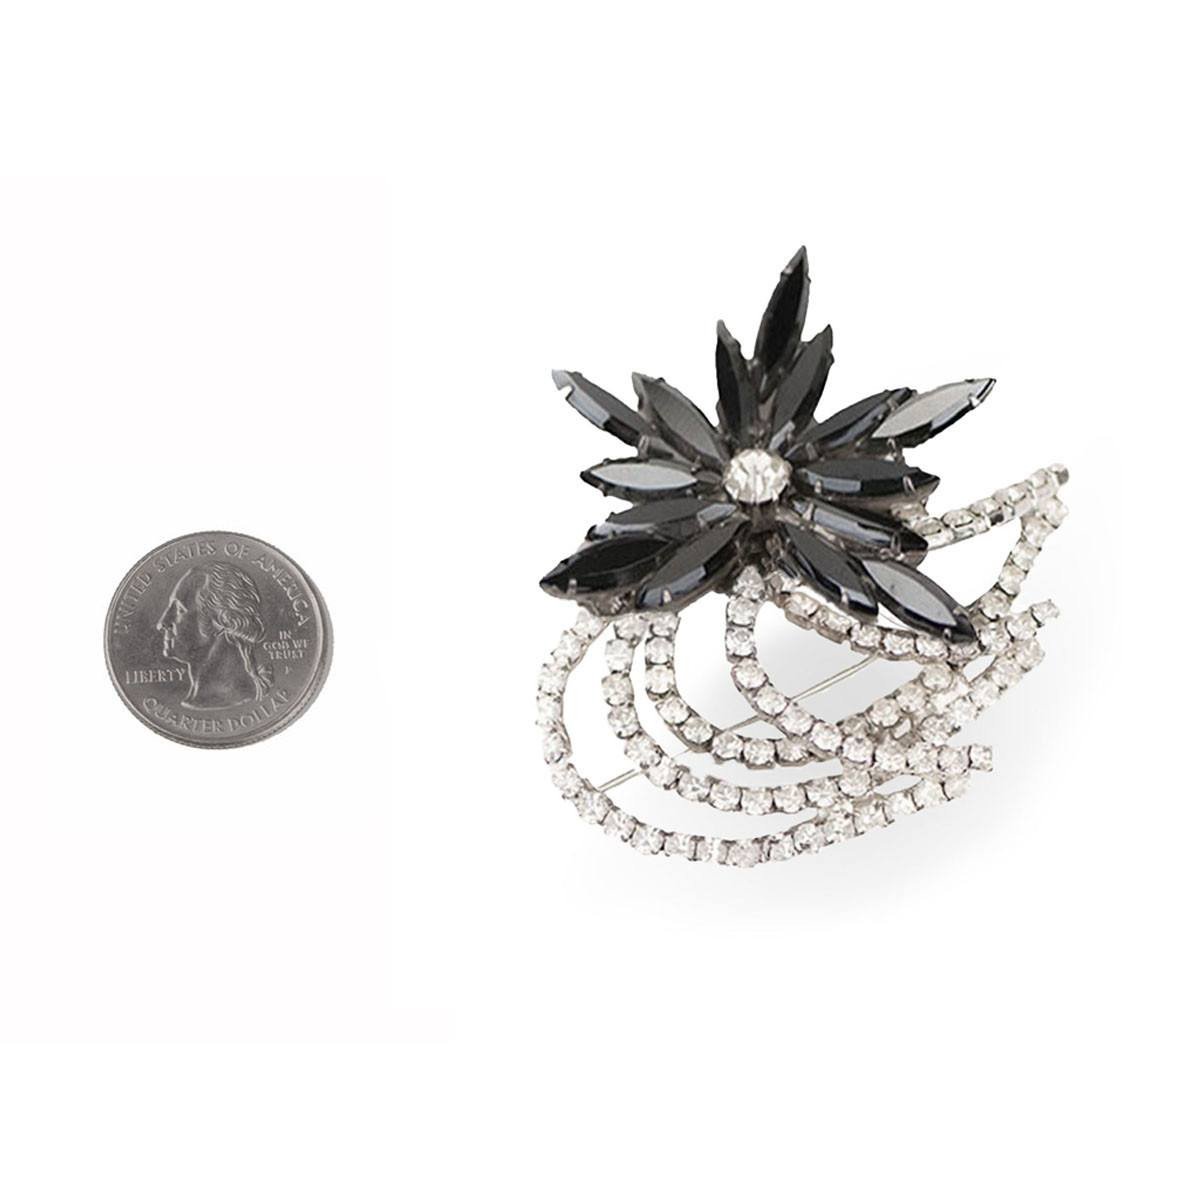 1970s Charcoal Gray Rhinestone Floral Brooch